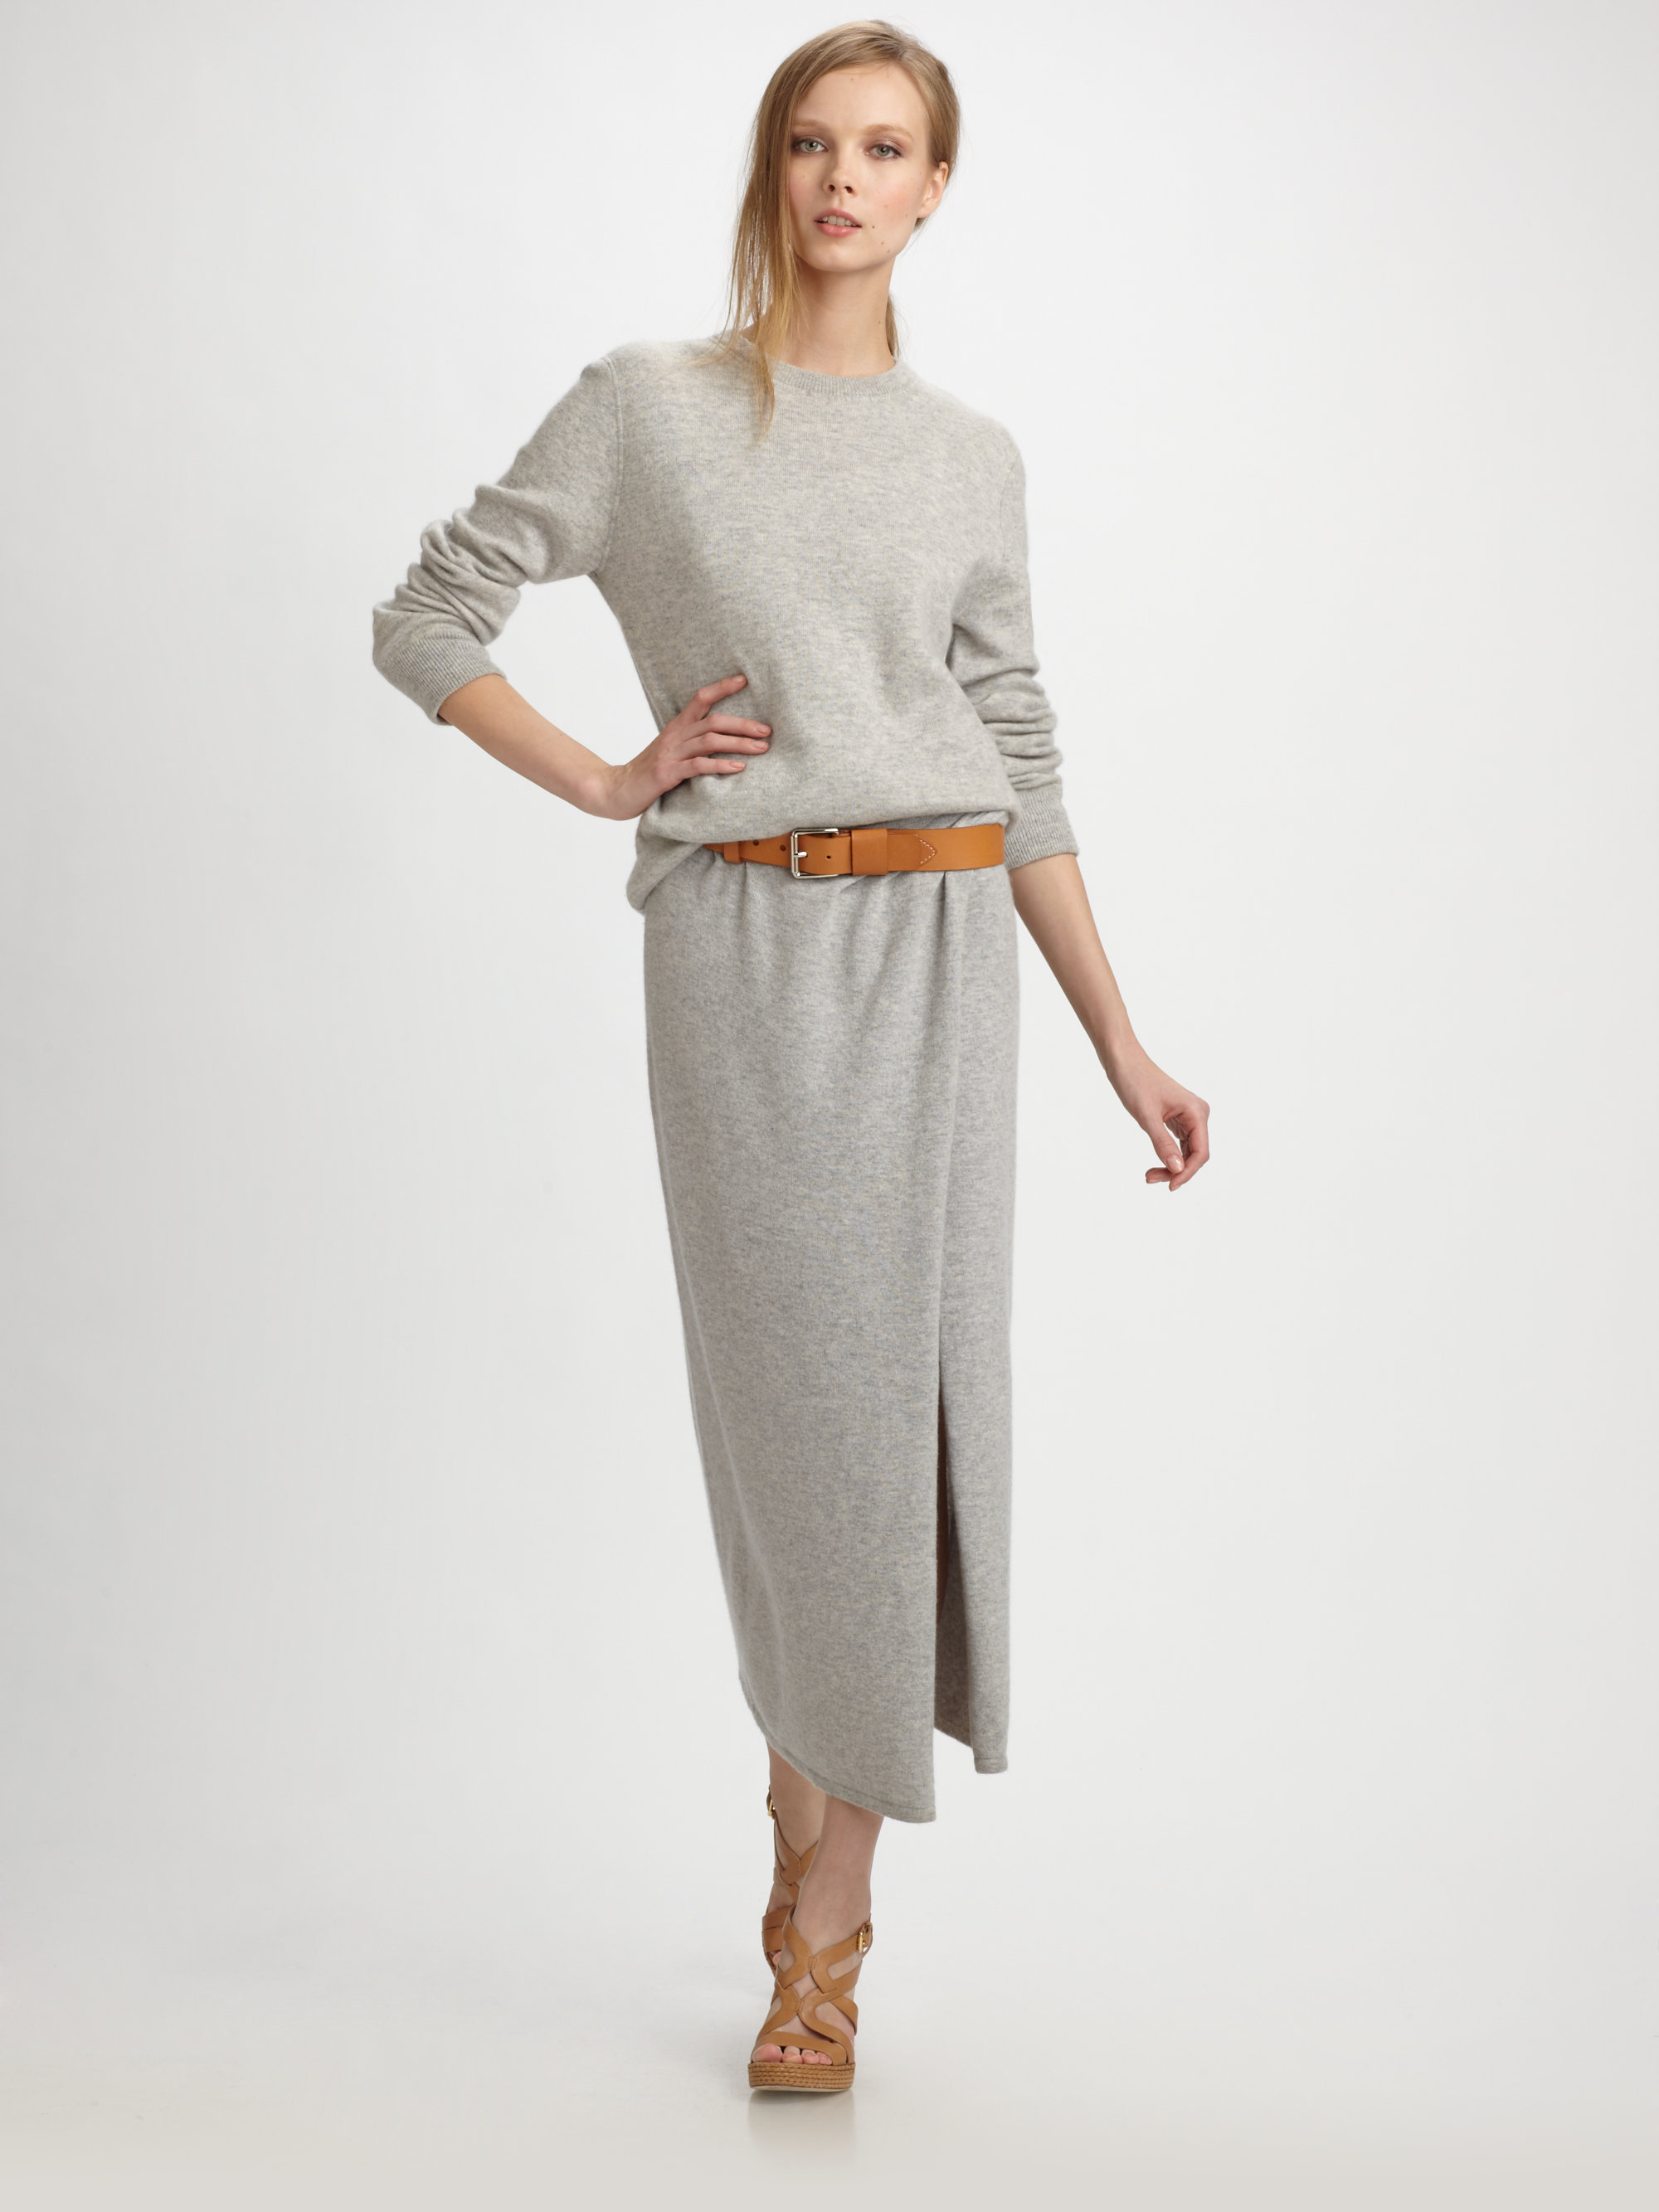 Lyst - Michael Kors Cashmere Midcalf Sarong Skirt in Gray